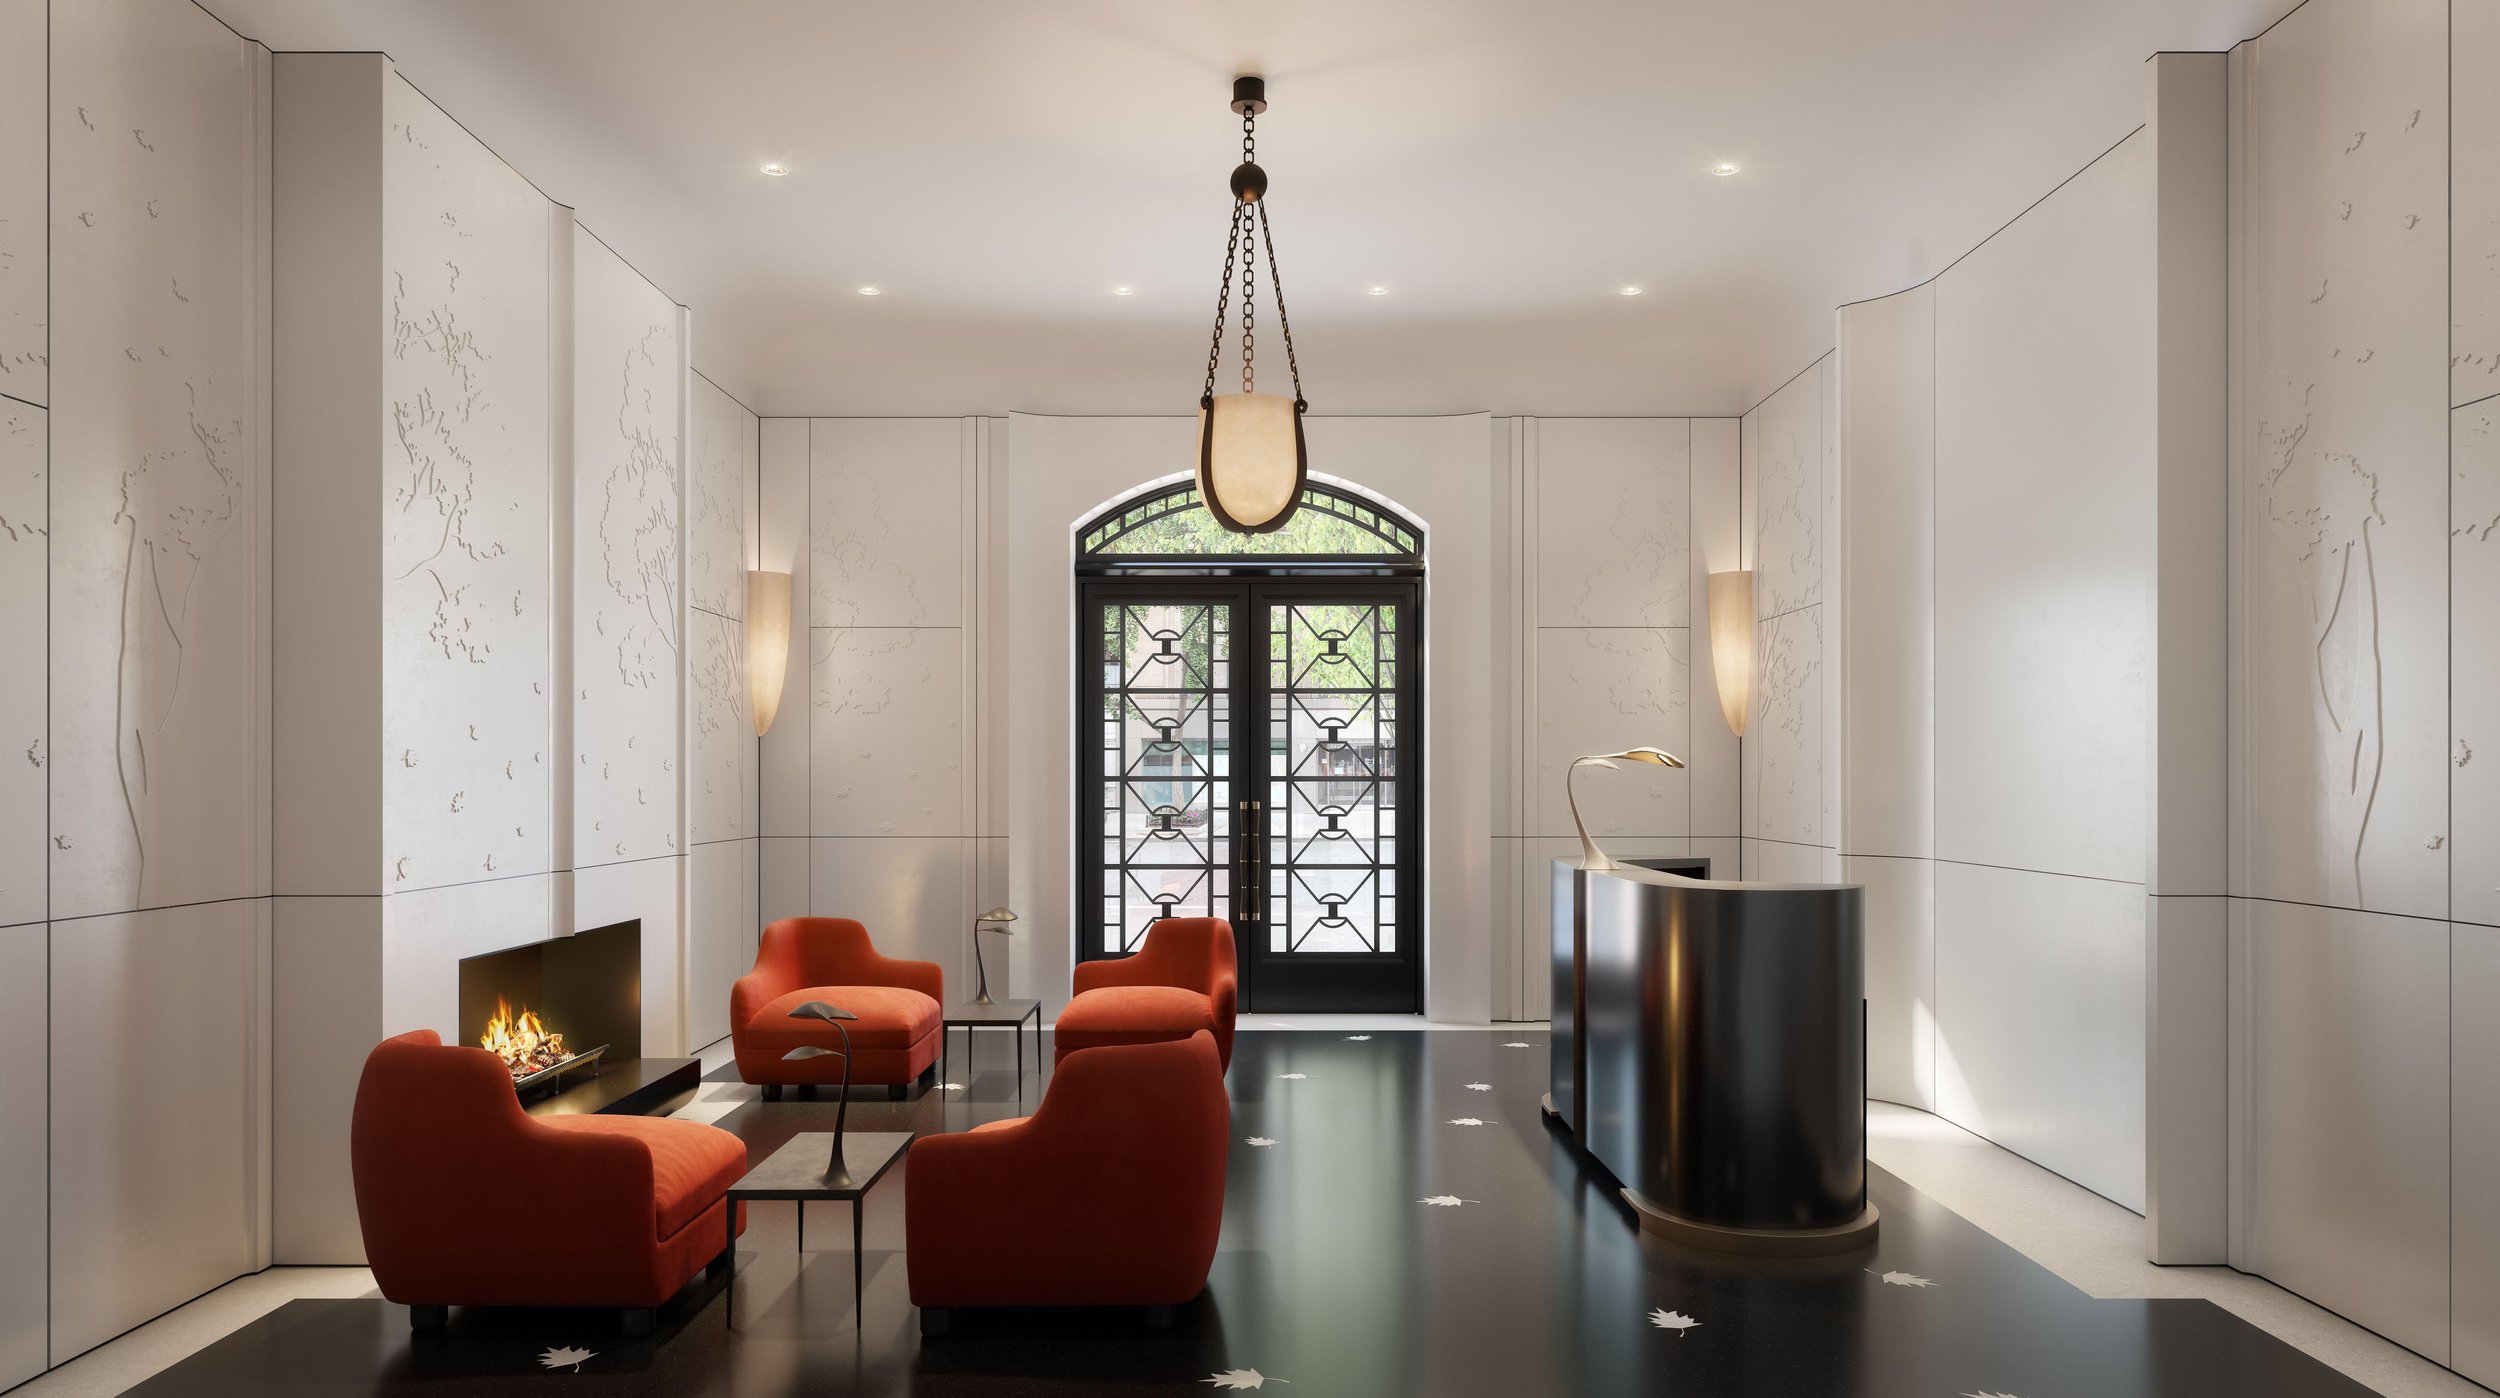  Situated in one of the most highly coveted and pristine enclaves of the Upper East Side, The Bellemont is surrounded by picturesque streets and beautiful townhouse blocks, with New York’s iconic Central Park just moments away. Manhattan’s famed cult